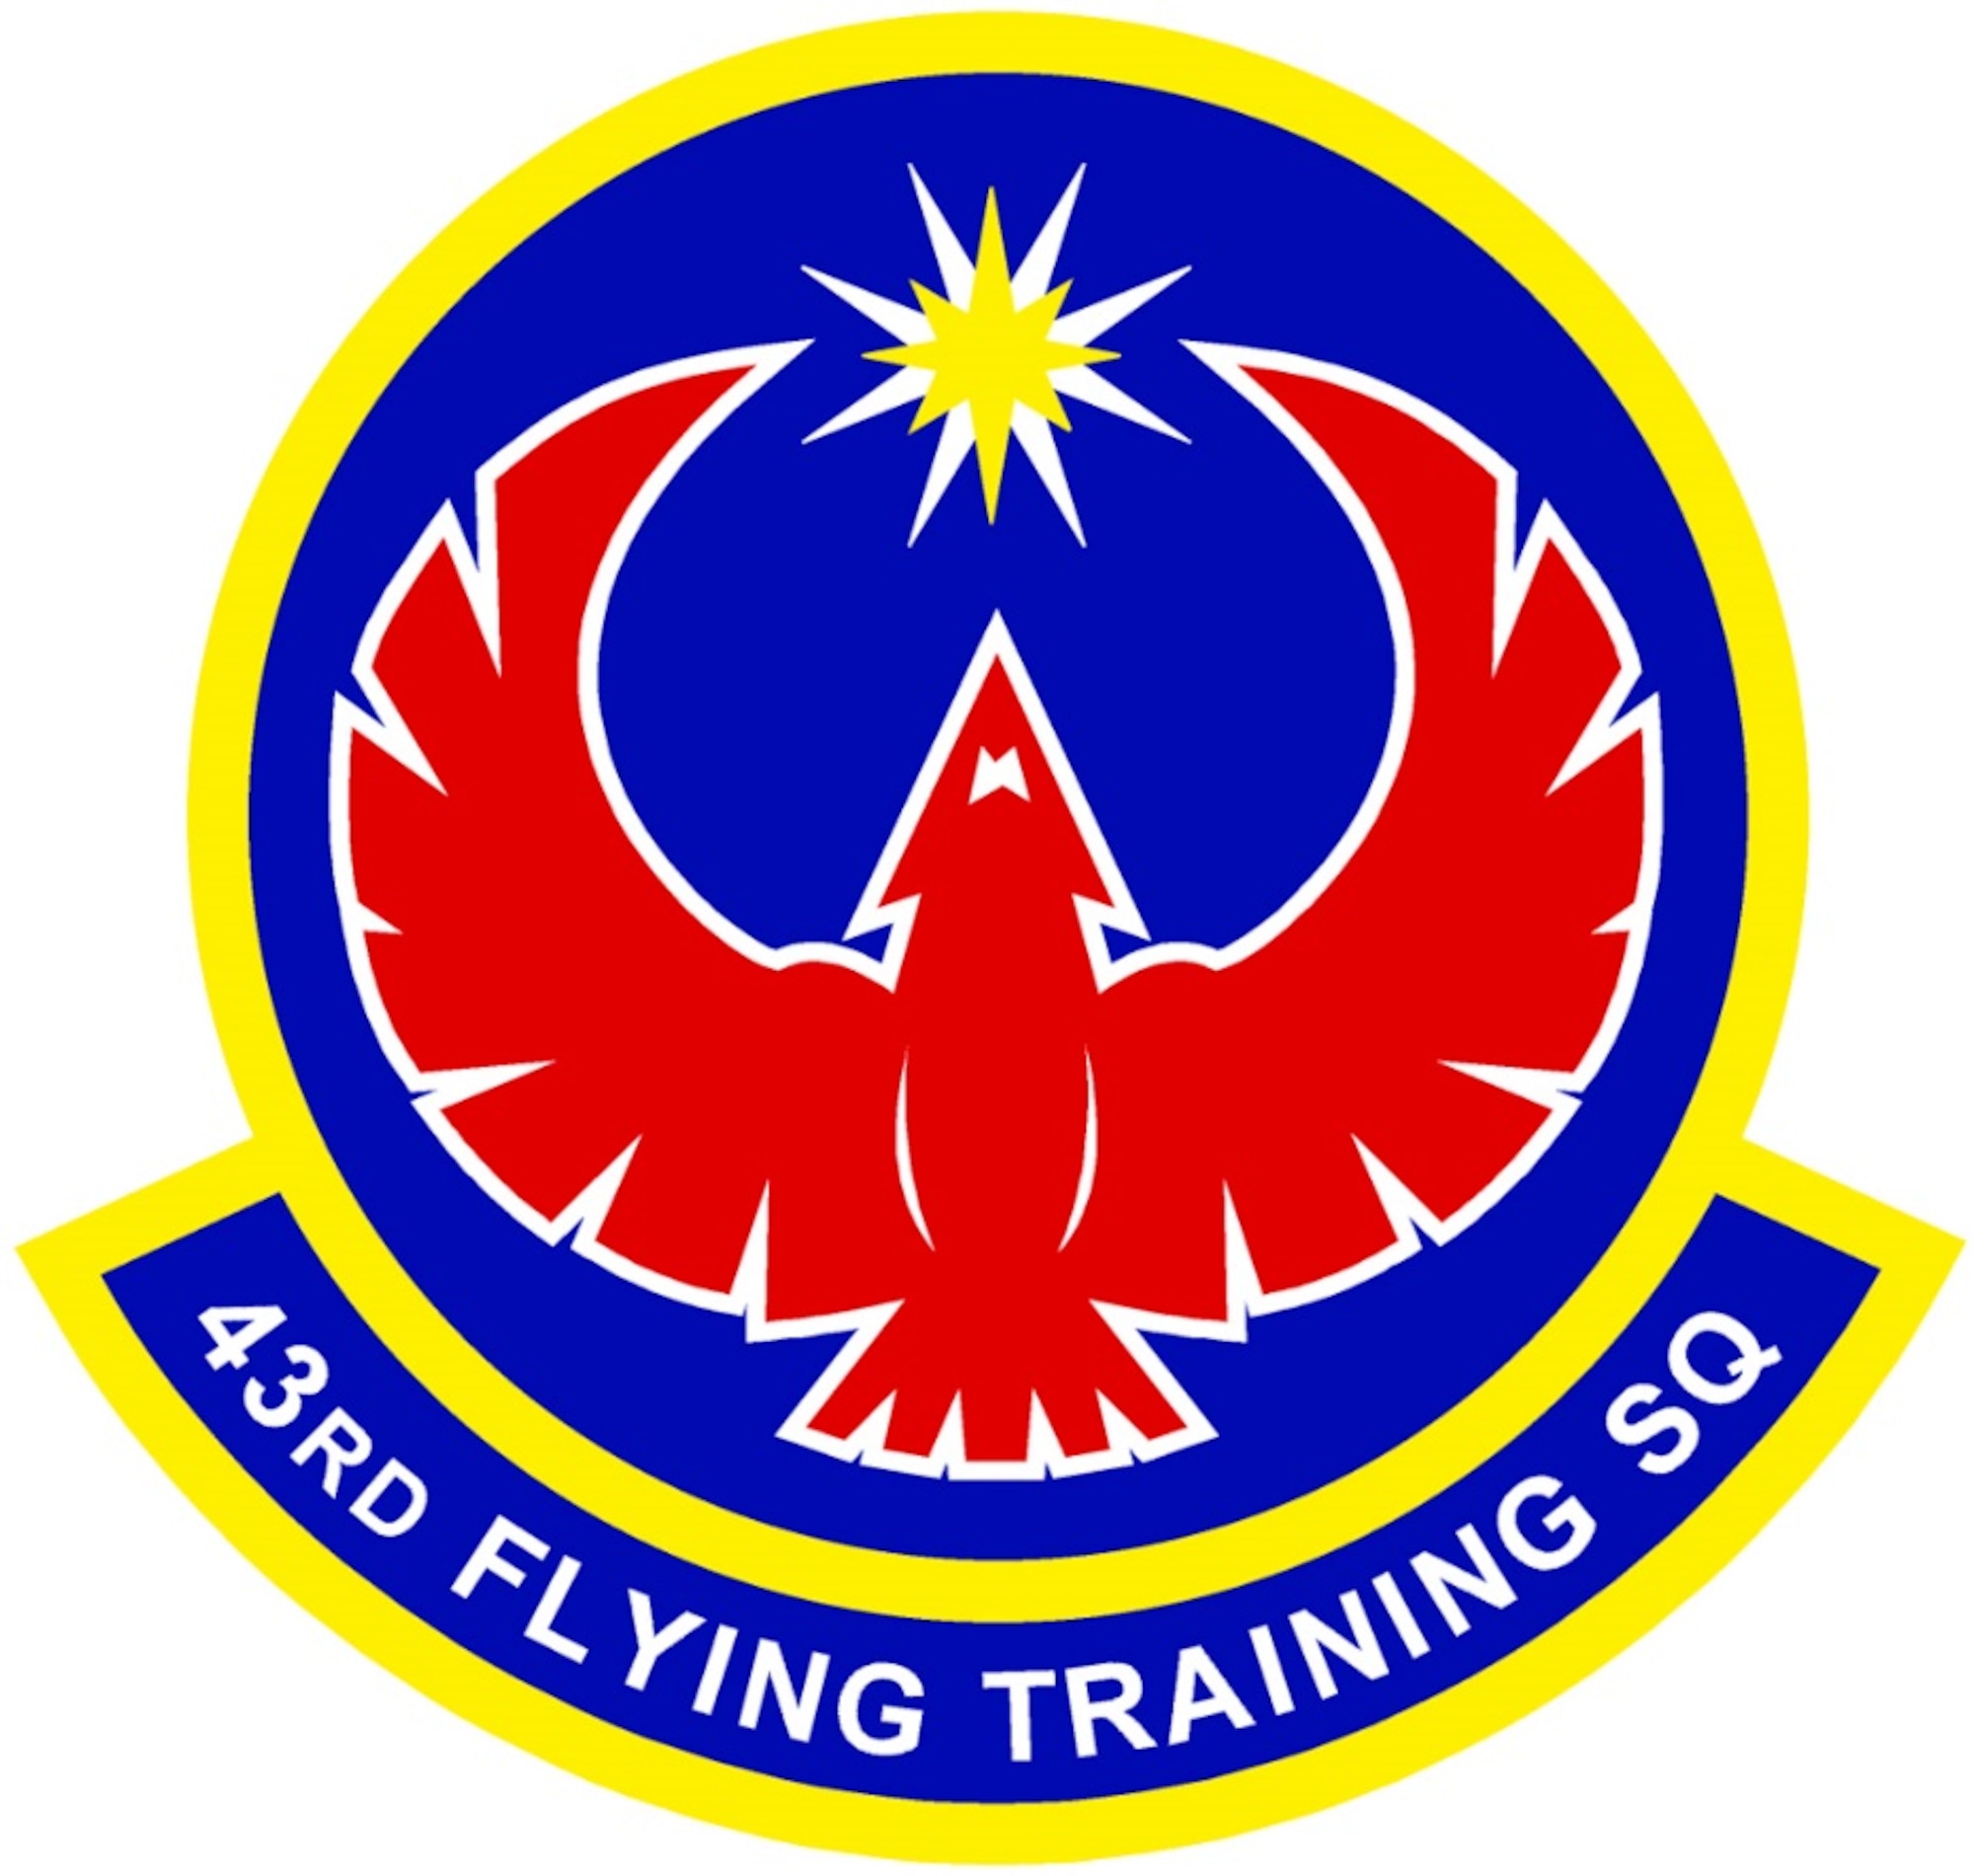 43rd Flying Training Squadron (AFRC) Emblem -- In accordance with Chapter 3 of AFI 84-105, commercial reproduction of this emblem is NOT permitted without the permission of the proponent organizational/unit commander.
